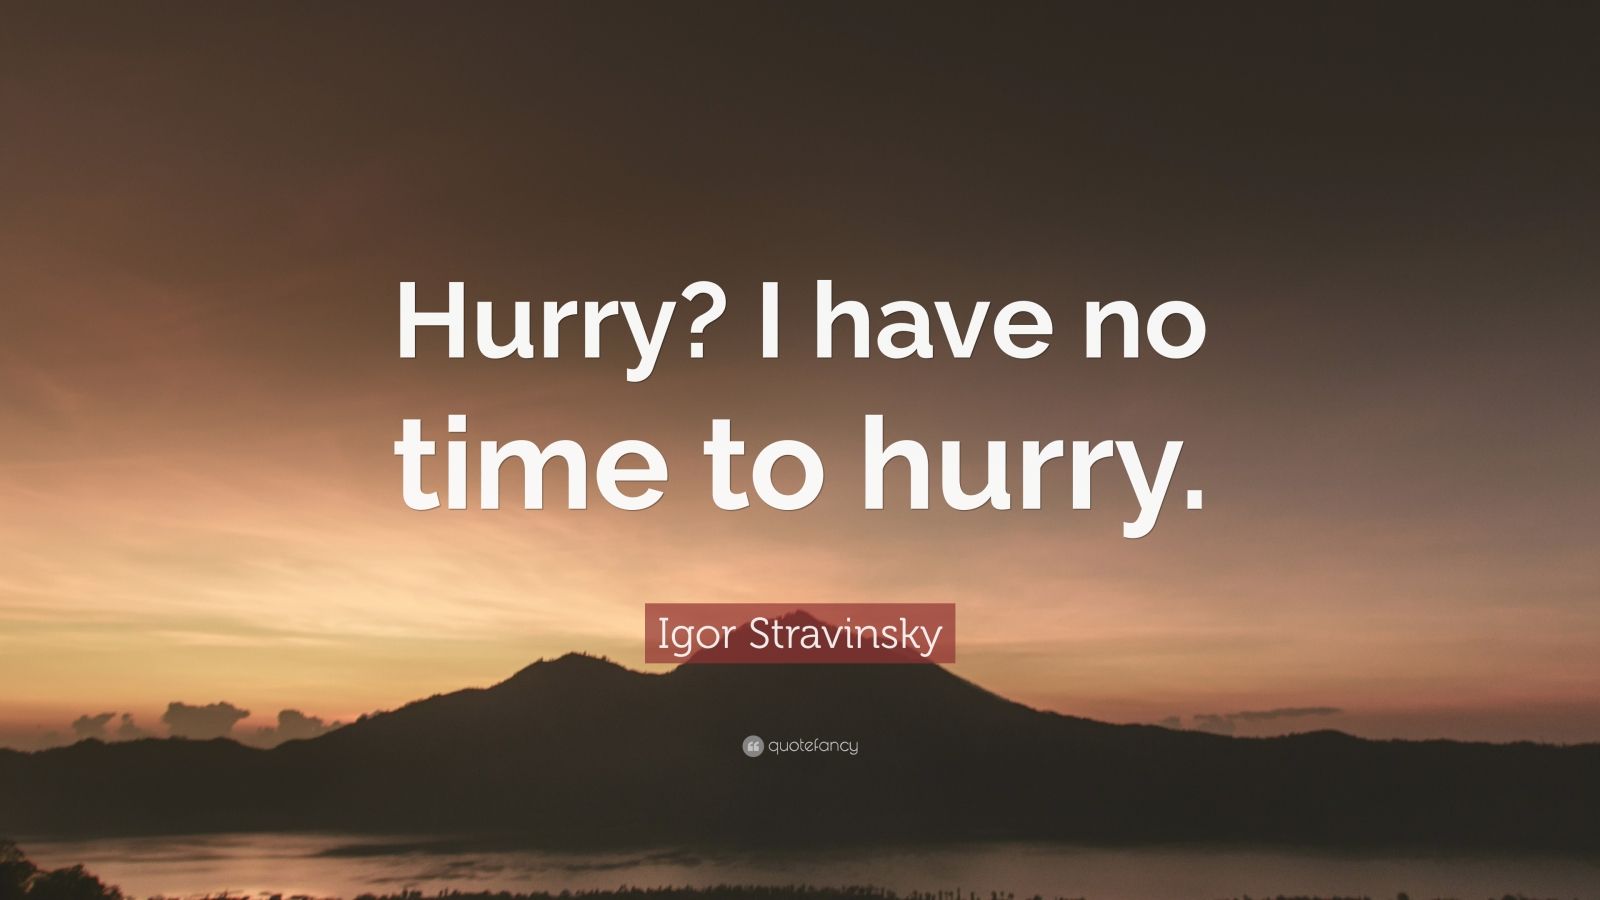 Igor Stravinsky Quote: "Hurry? I have no time to hurry." (9 wallpapers) - Quotefancy